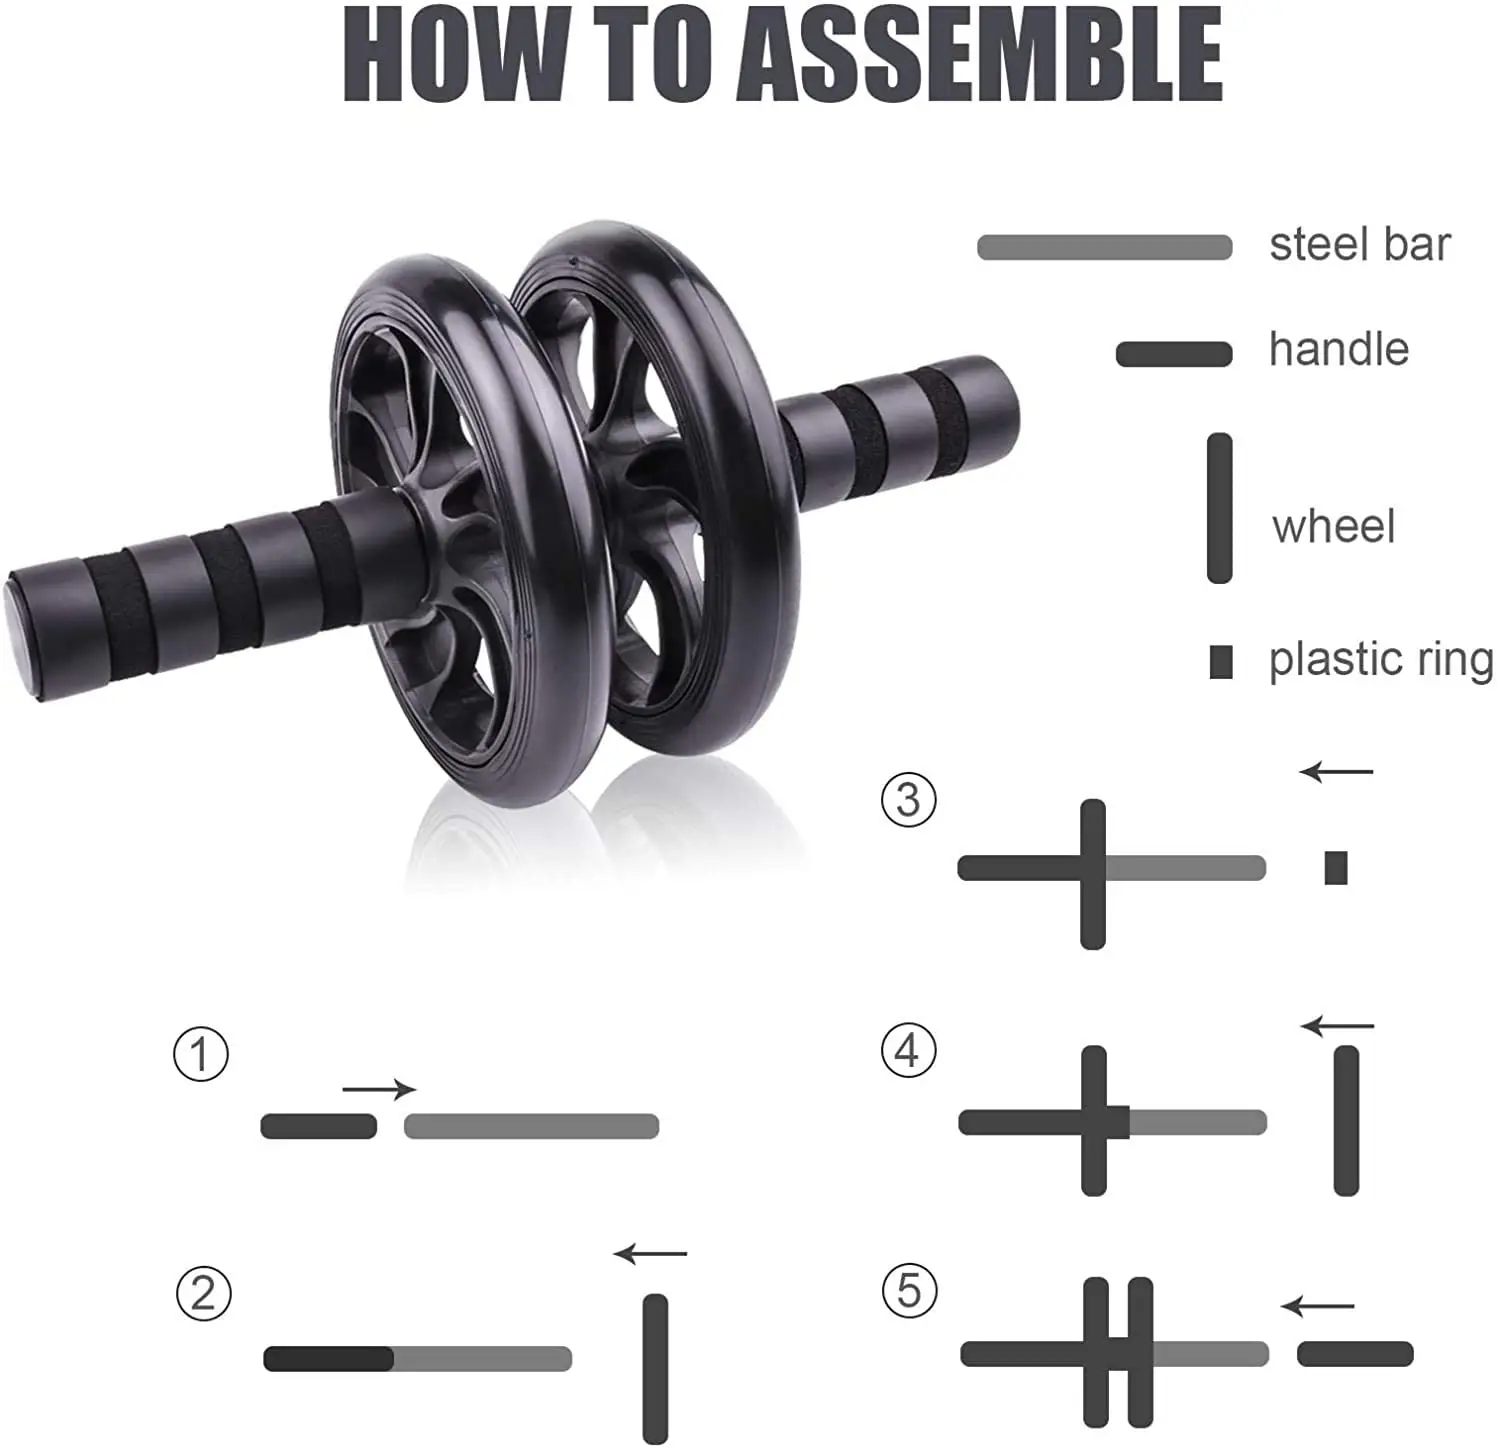 

AB Wheel Abdominals Giant Wheel Abdominals Fitness Equipment Roller Reduces Abdomen and Exercises Abdominal Muscles